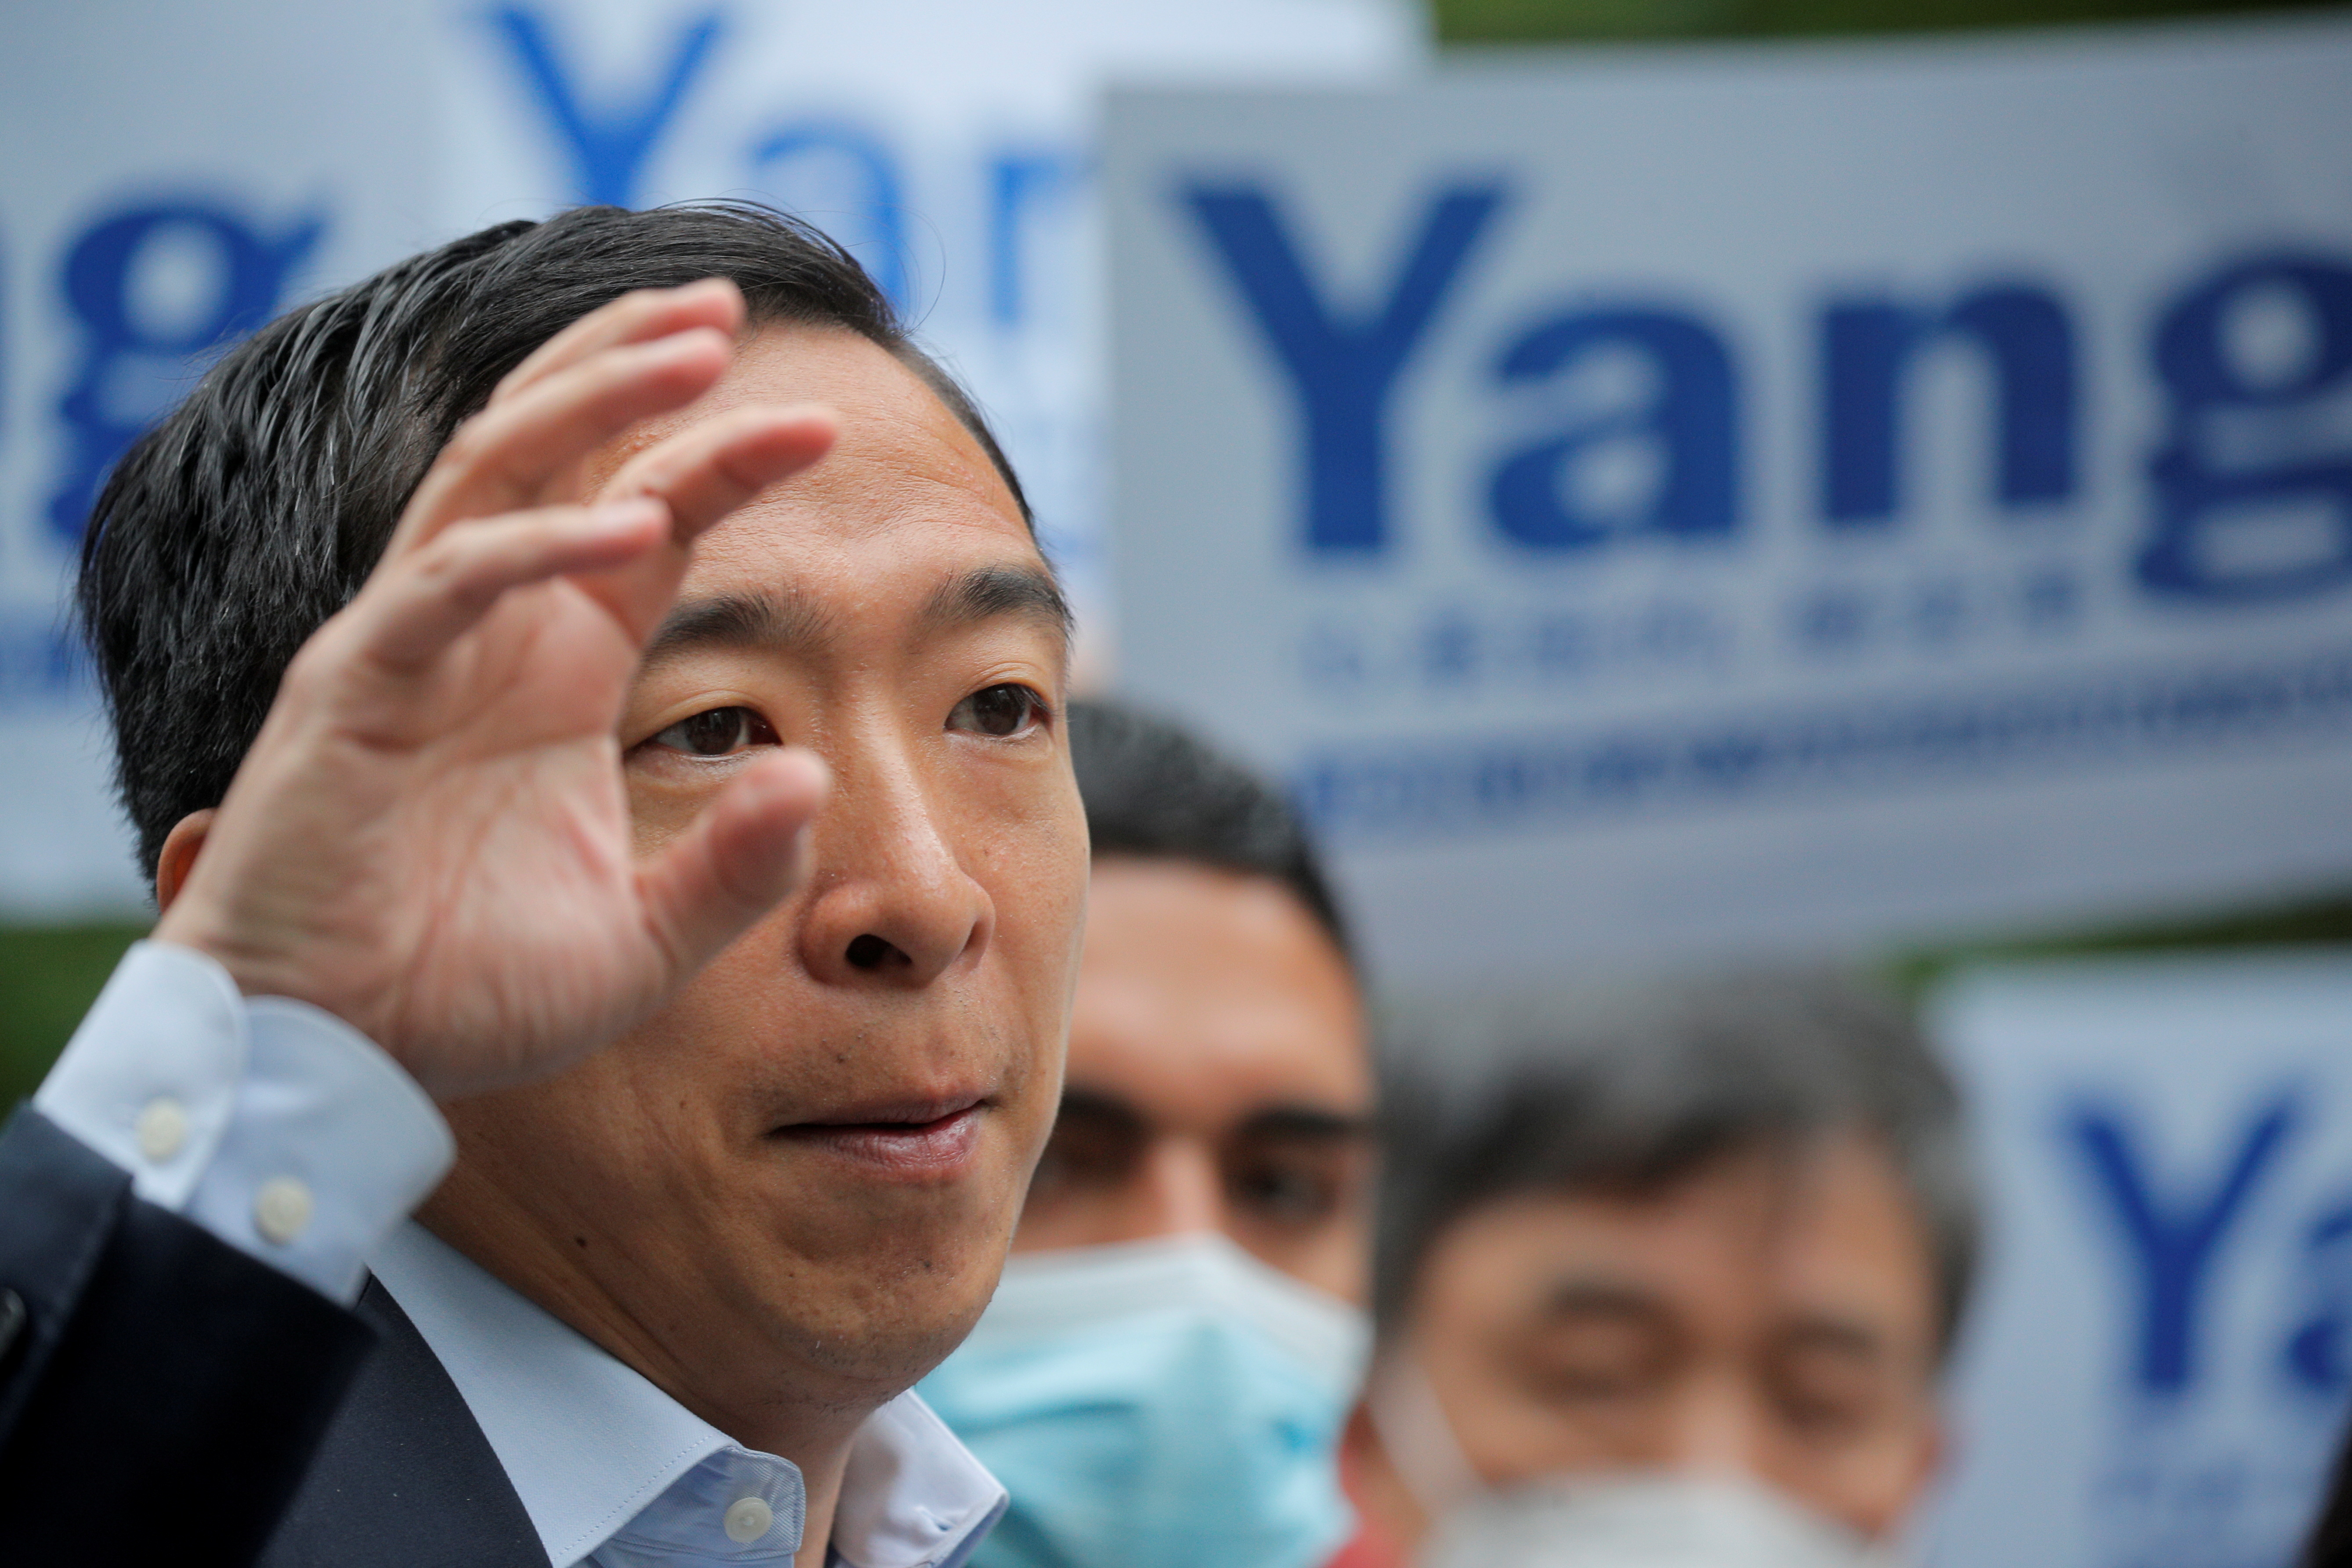 Andrew Yang, democratic candidate for mayor of New York City, speaks during a campaign appearance at City Hall Park in New York